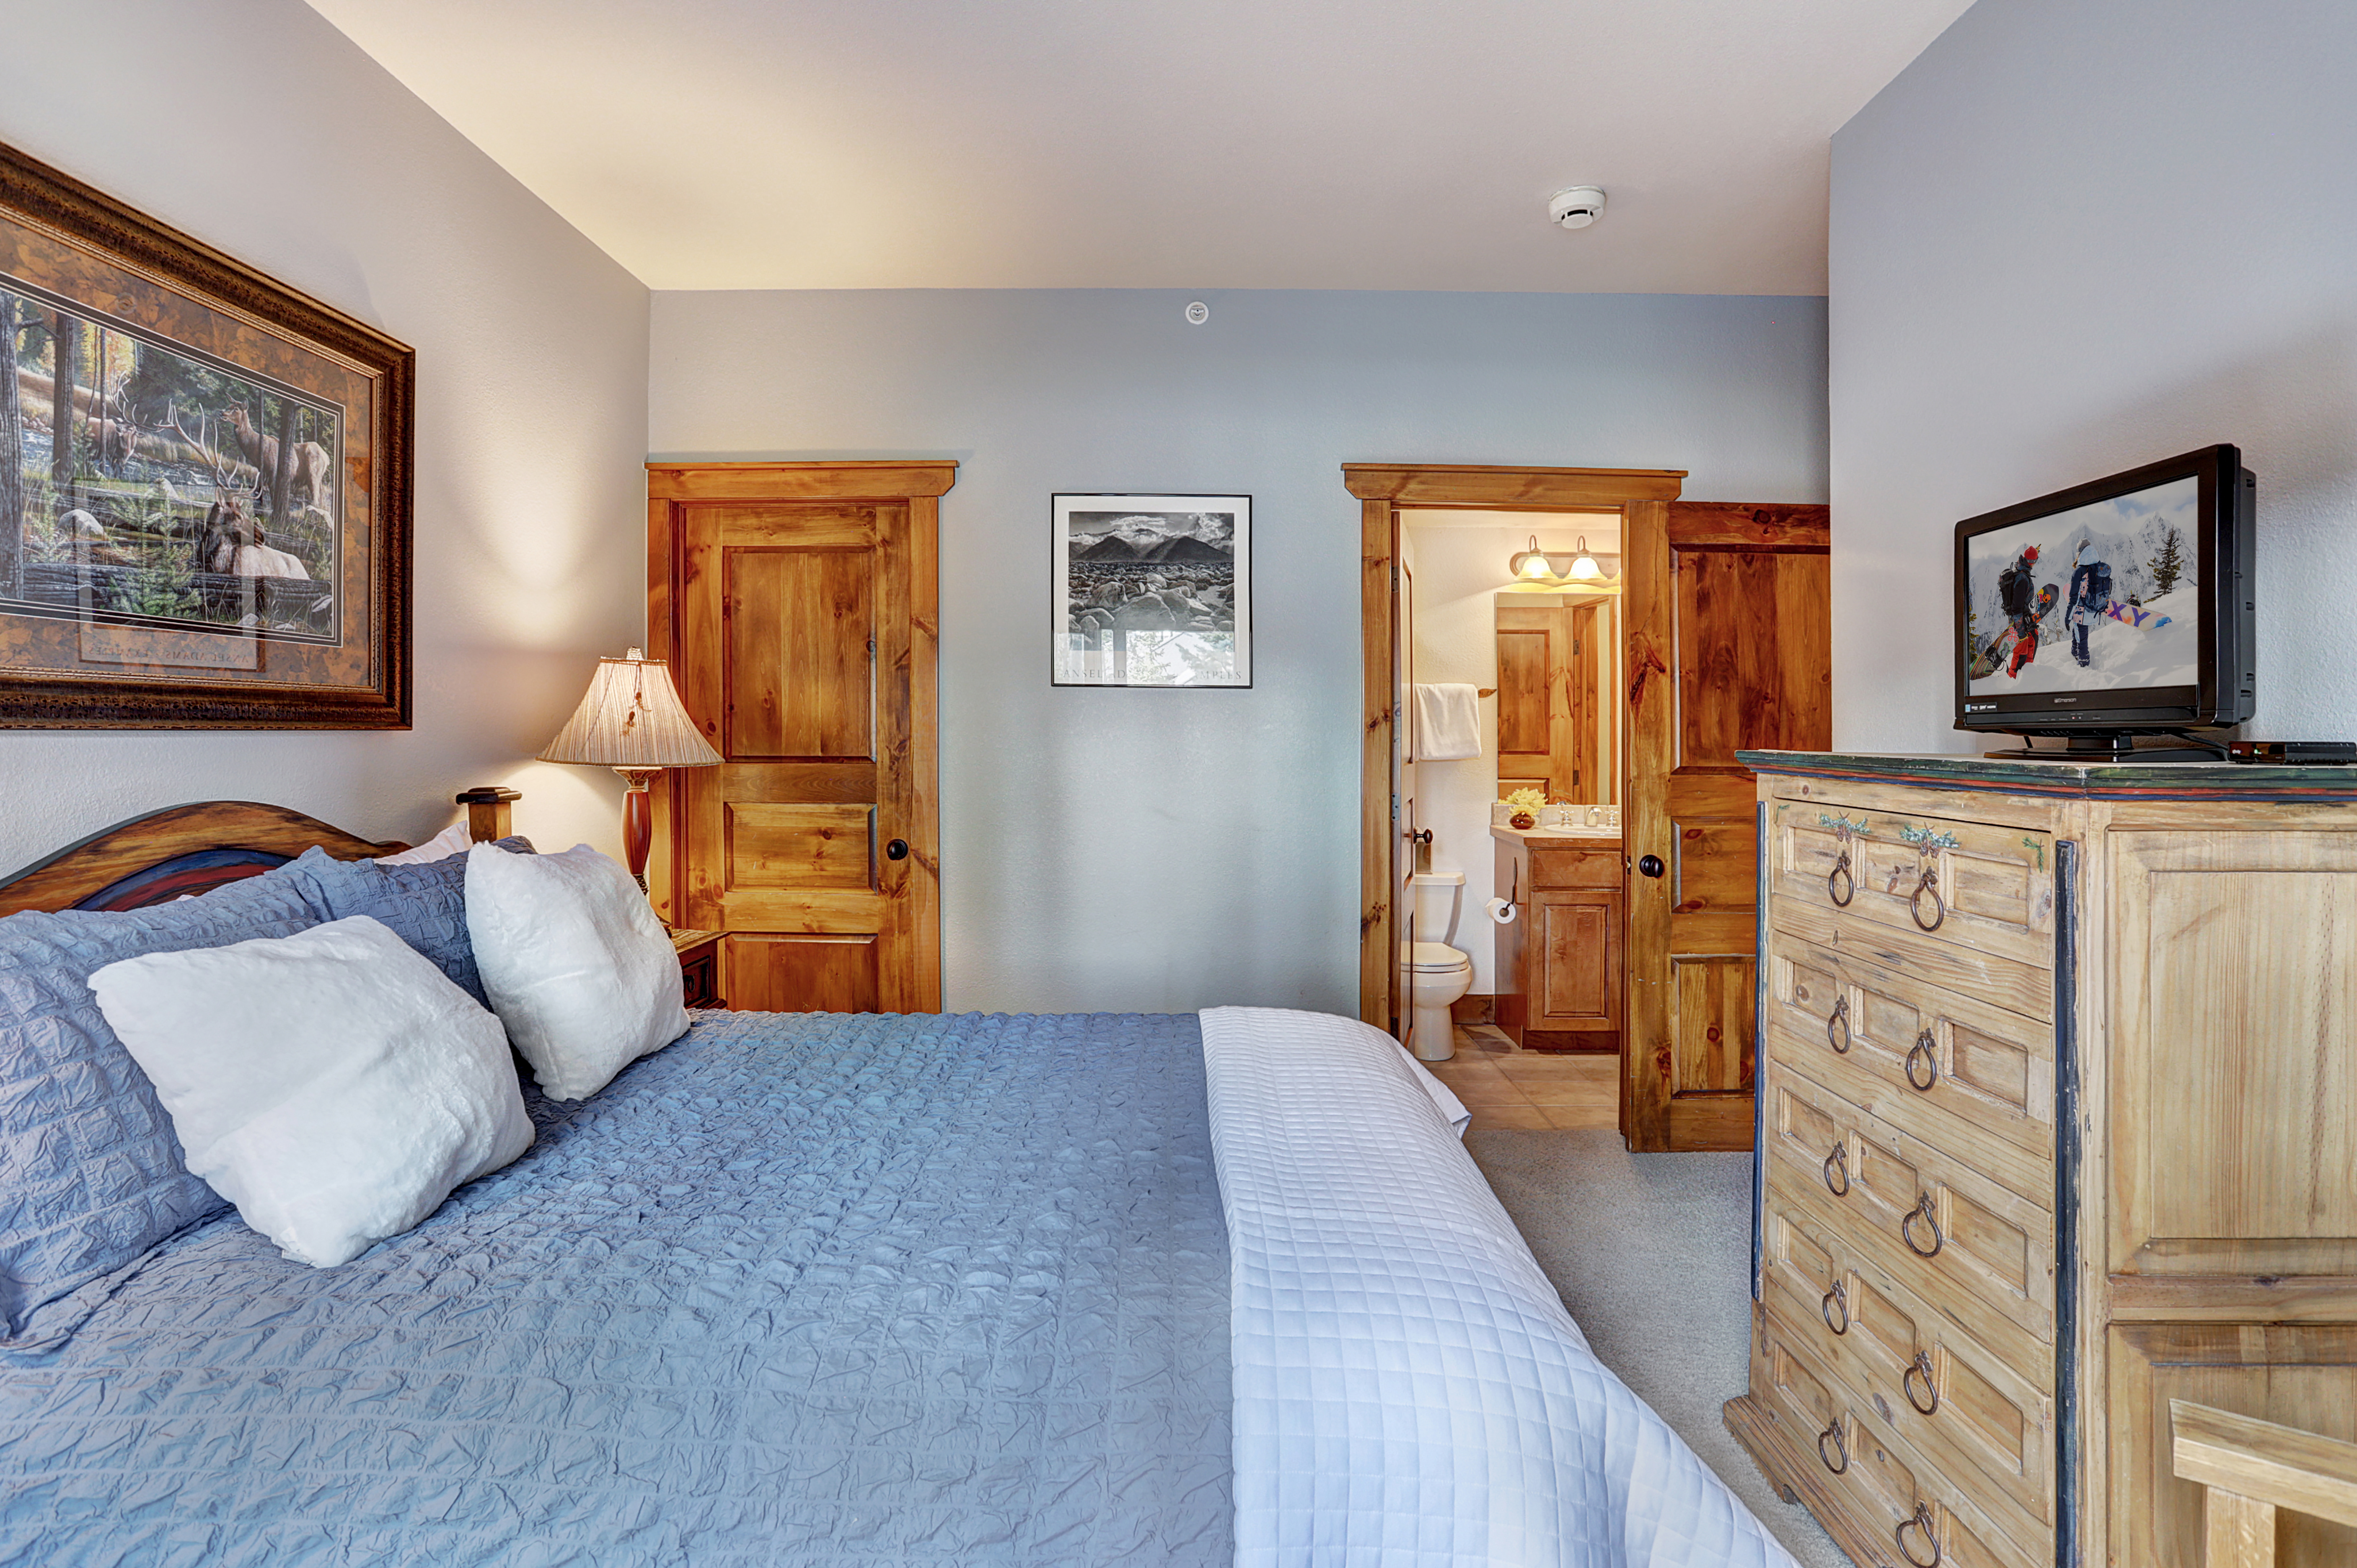 This queen bedroom offers a spacious closet and private bathroom - Amber Sky Breckenridge Vacation Rental